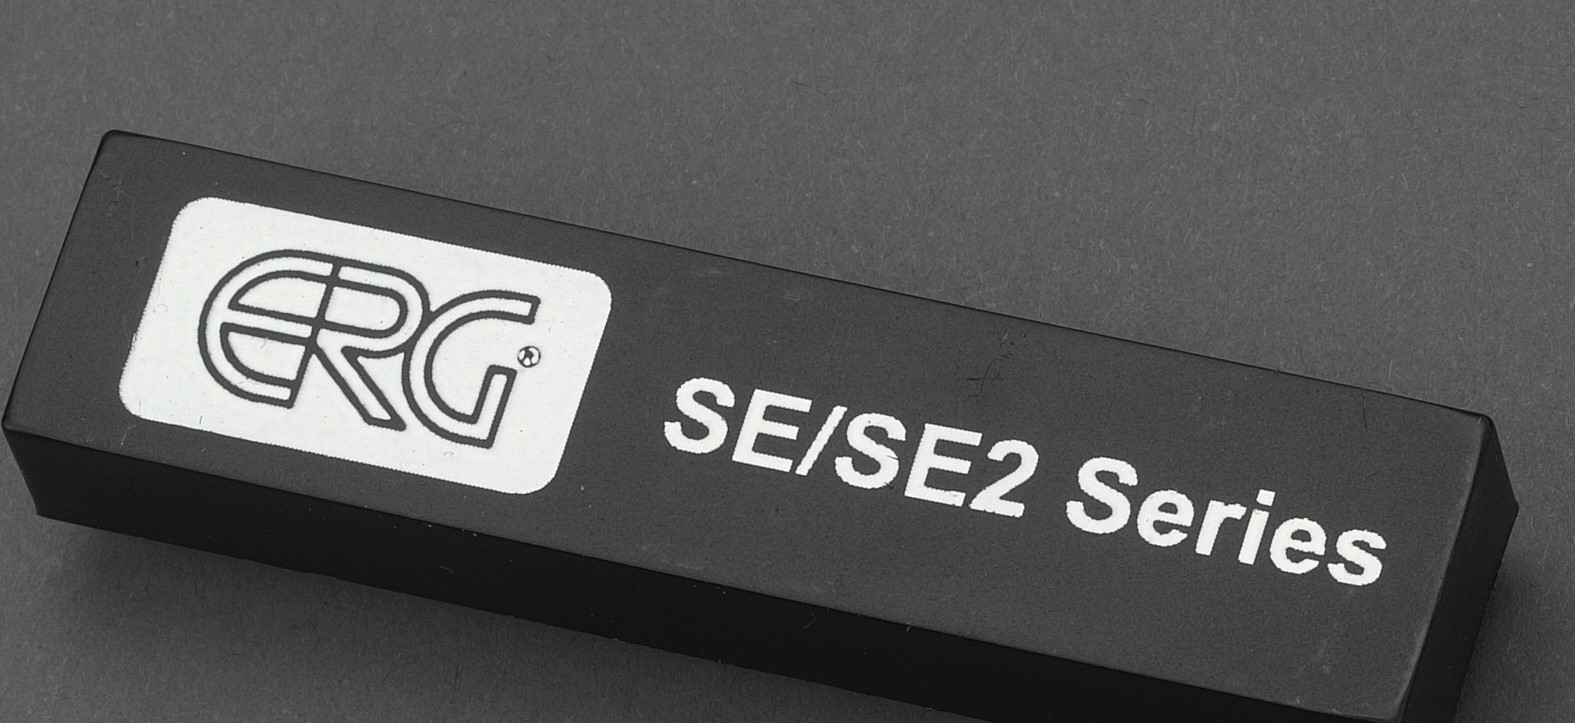 Se and S Series